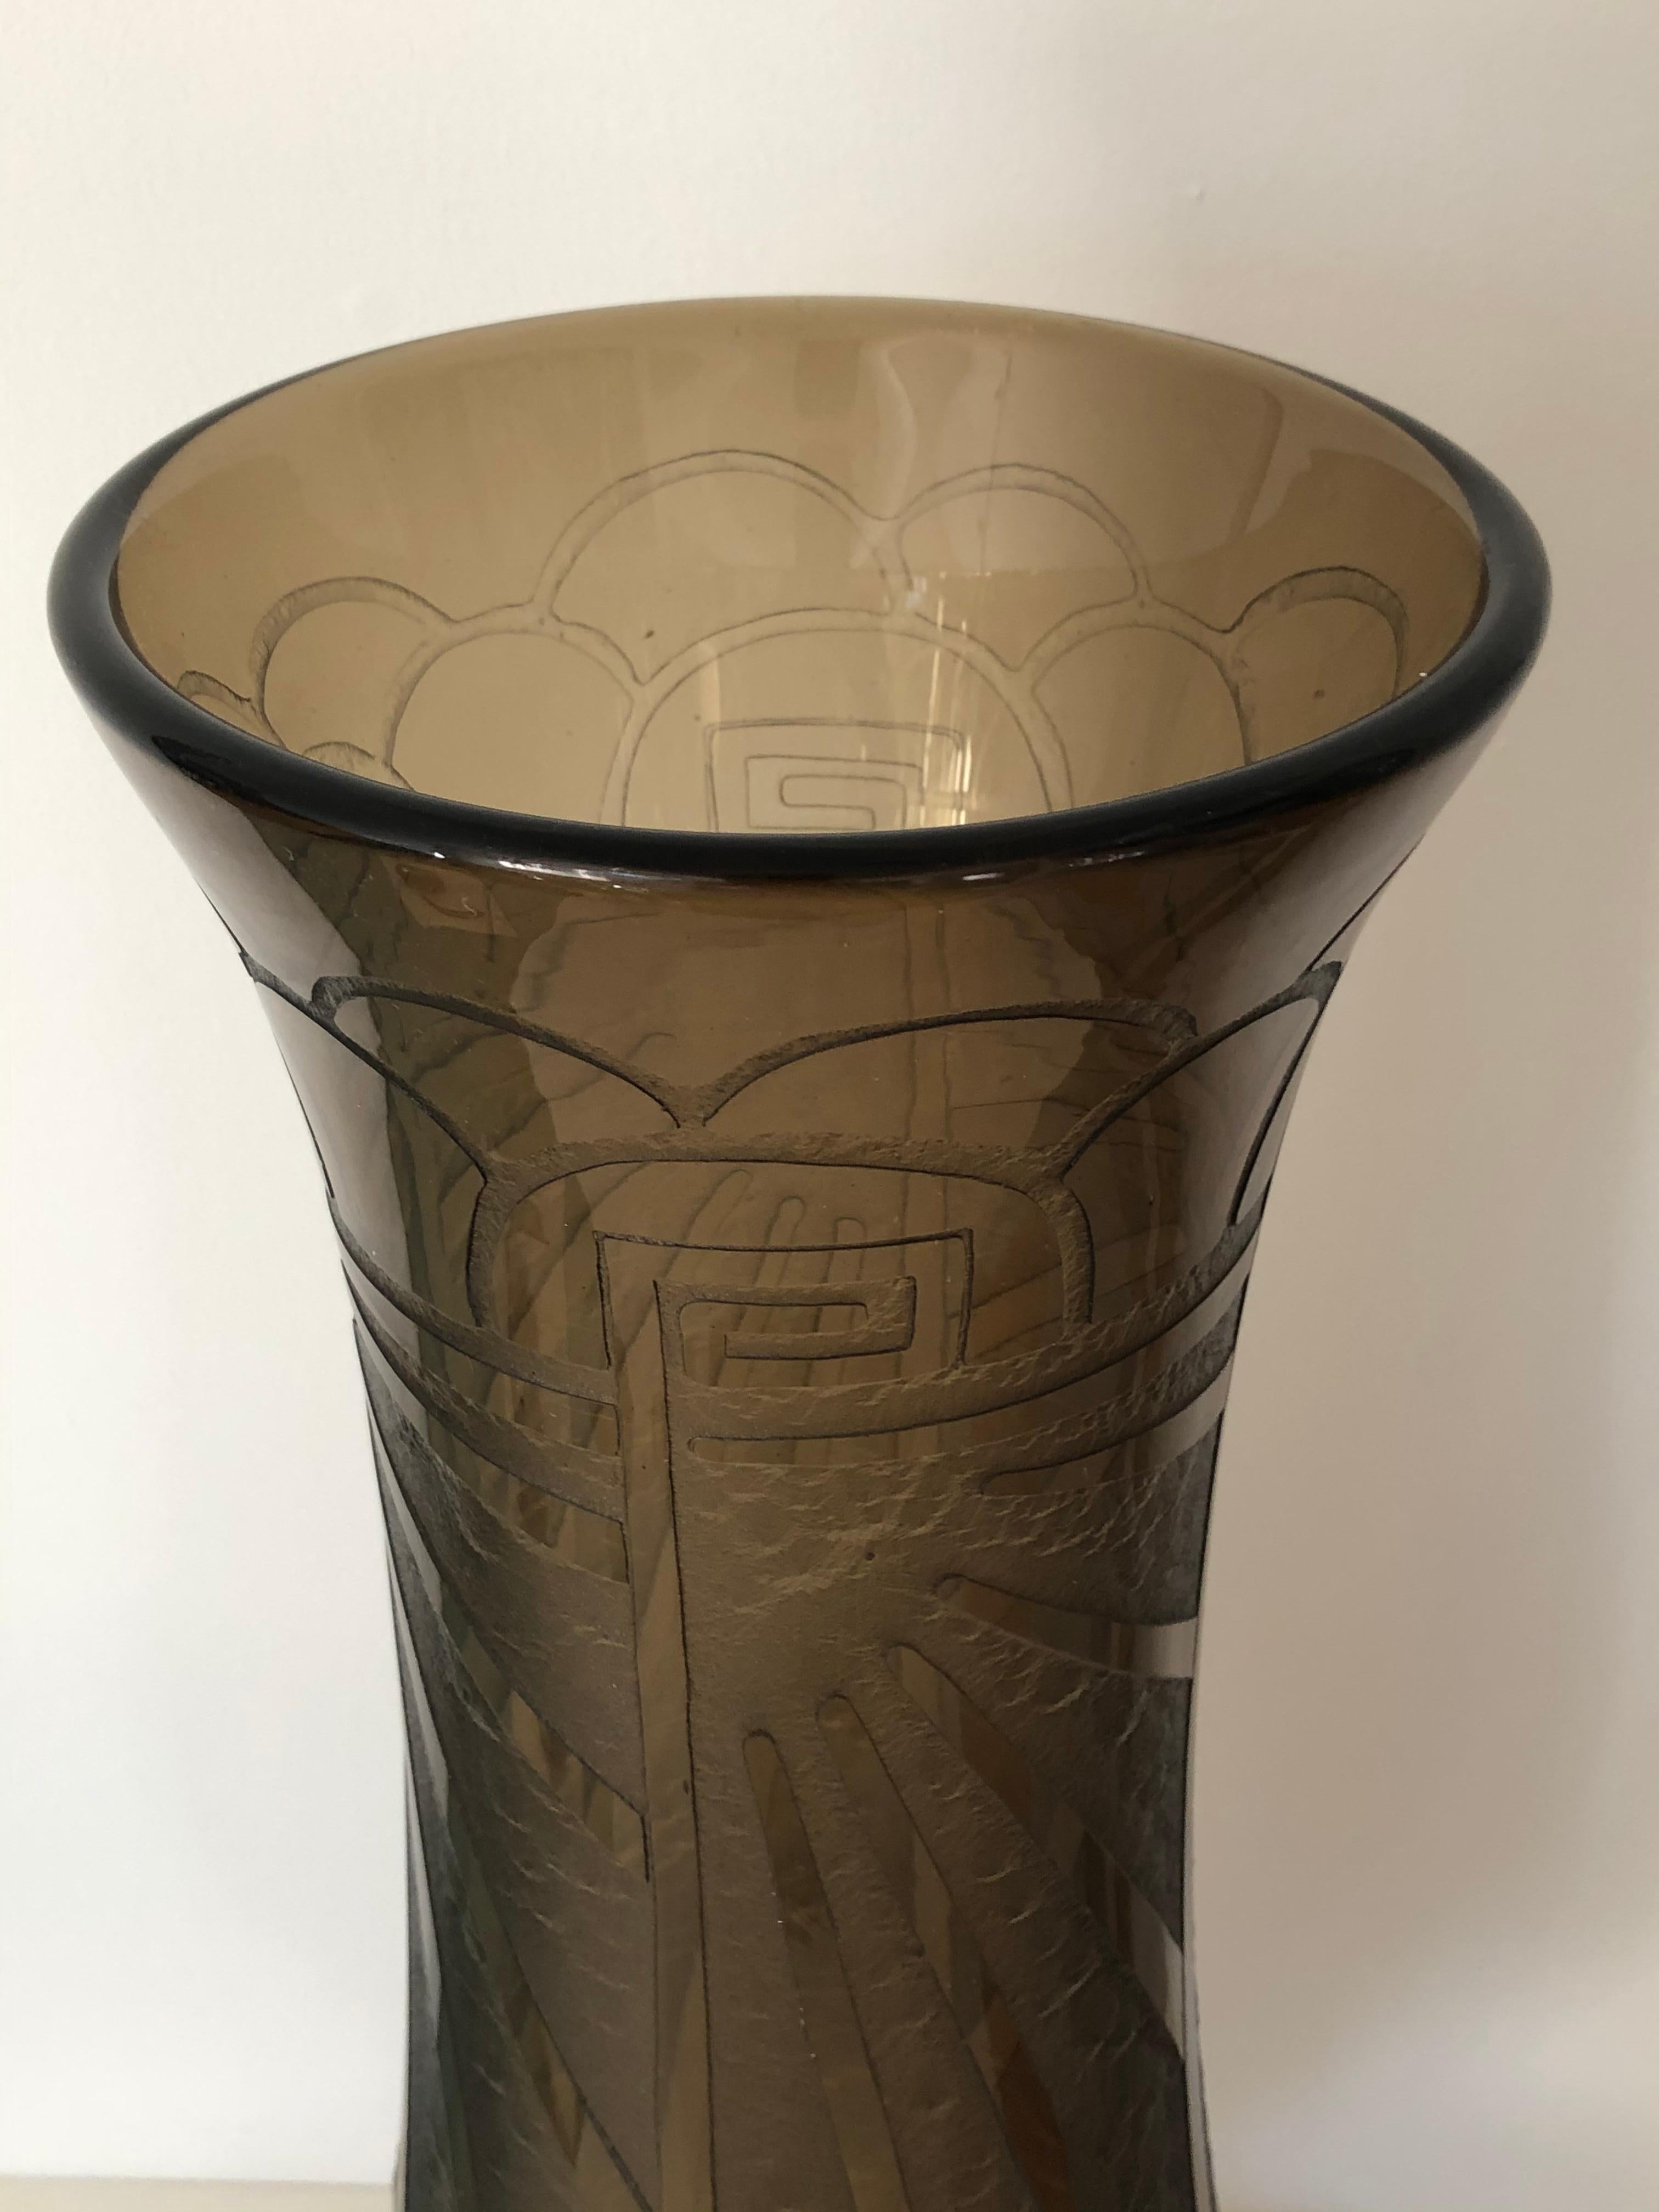 Art Deco Massive Tall Schneider Wheel Cut Engraved Acid Etched Vase In Excellent Condition For Sale In Westport, CT